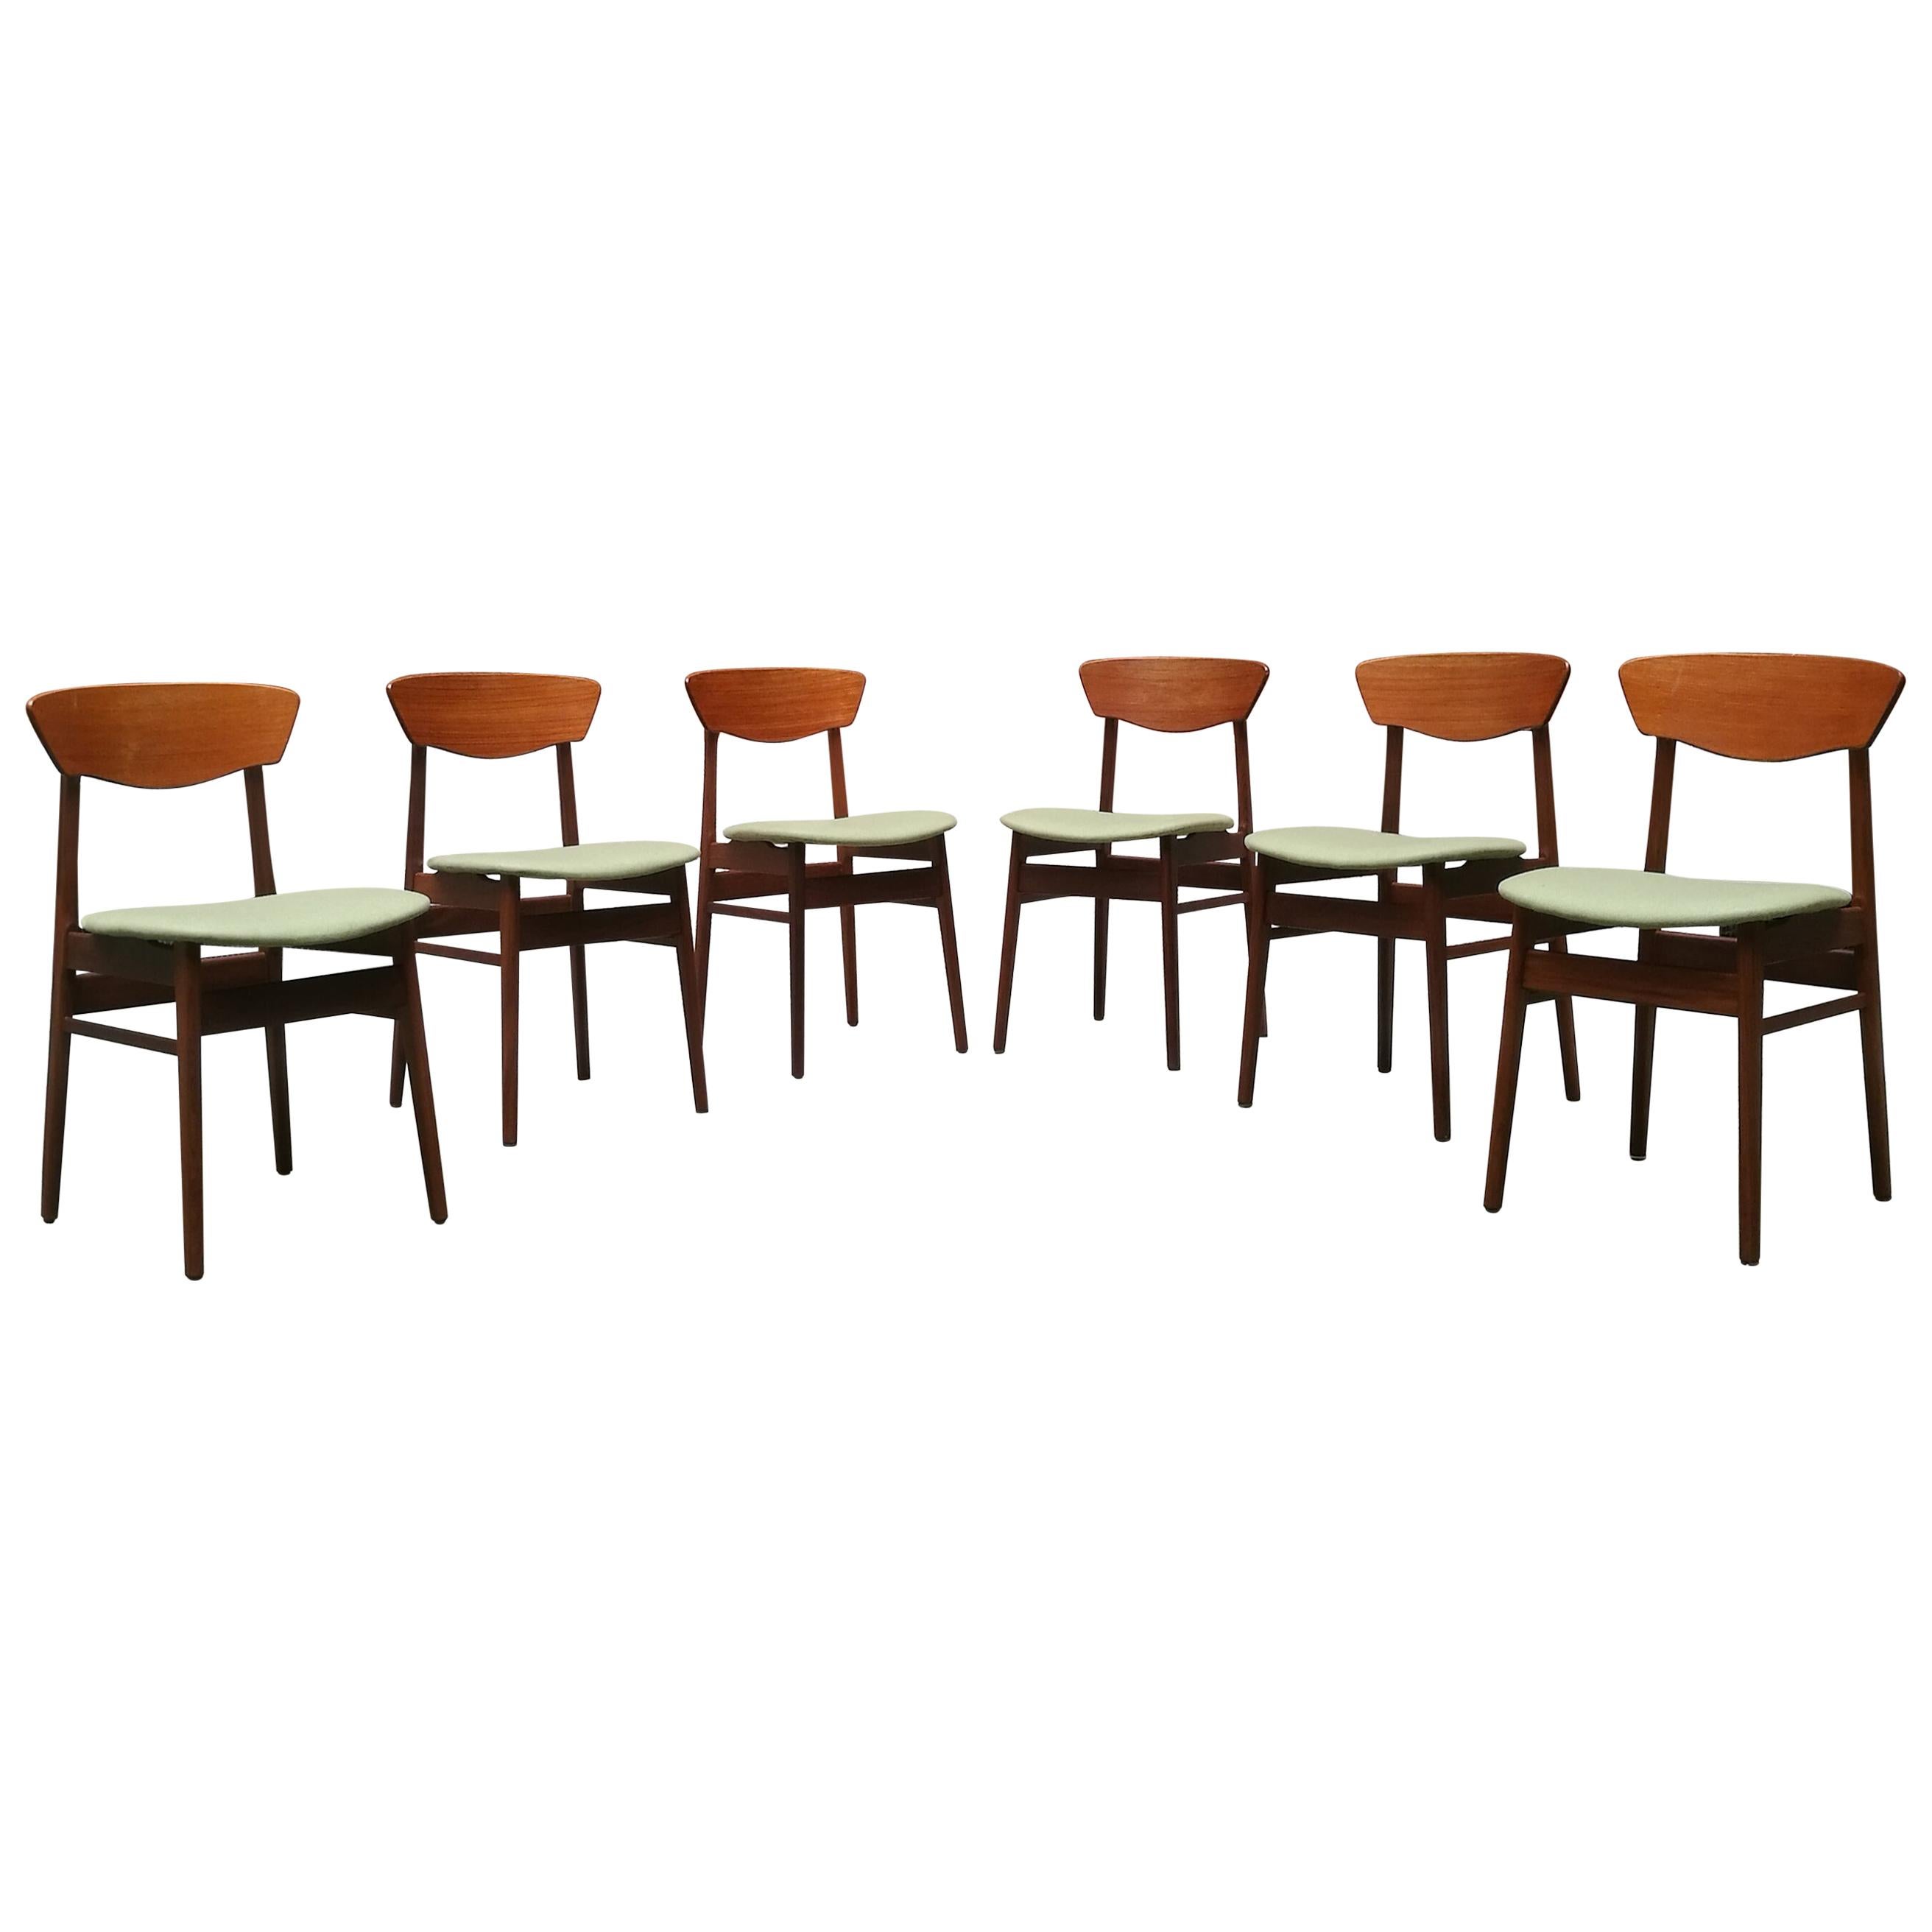 Danish Teak Chairs with Green Seats from 1960s